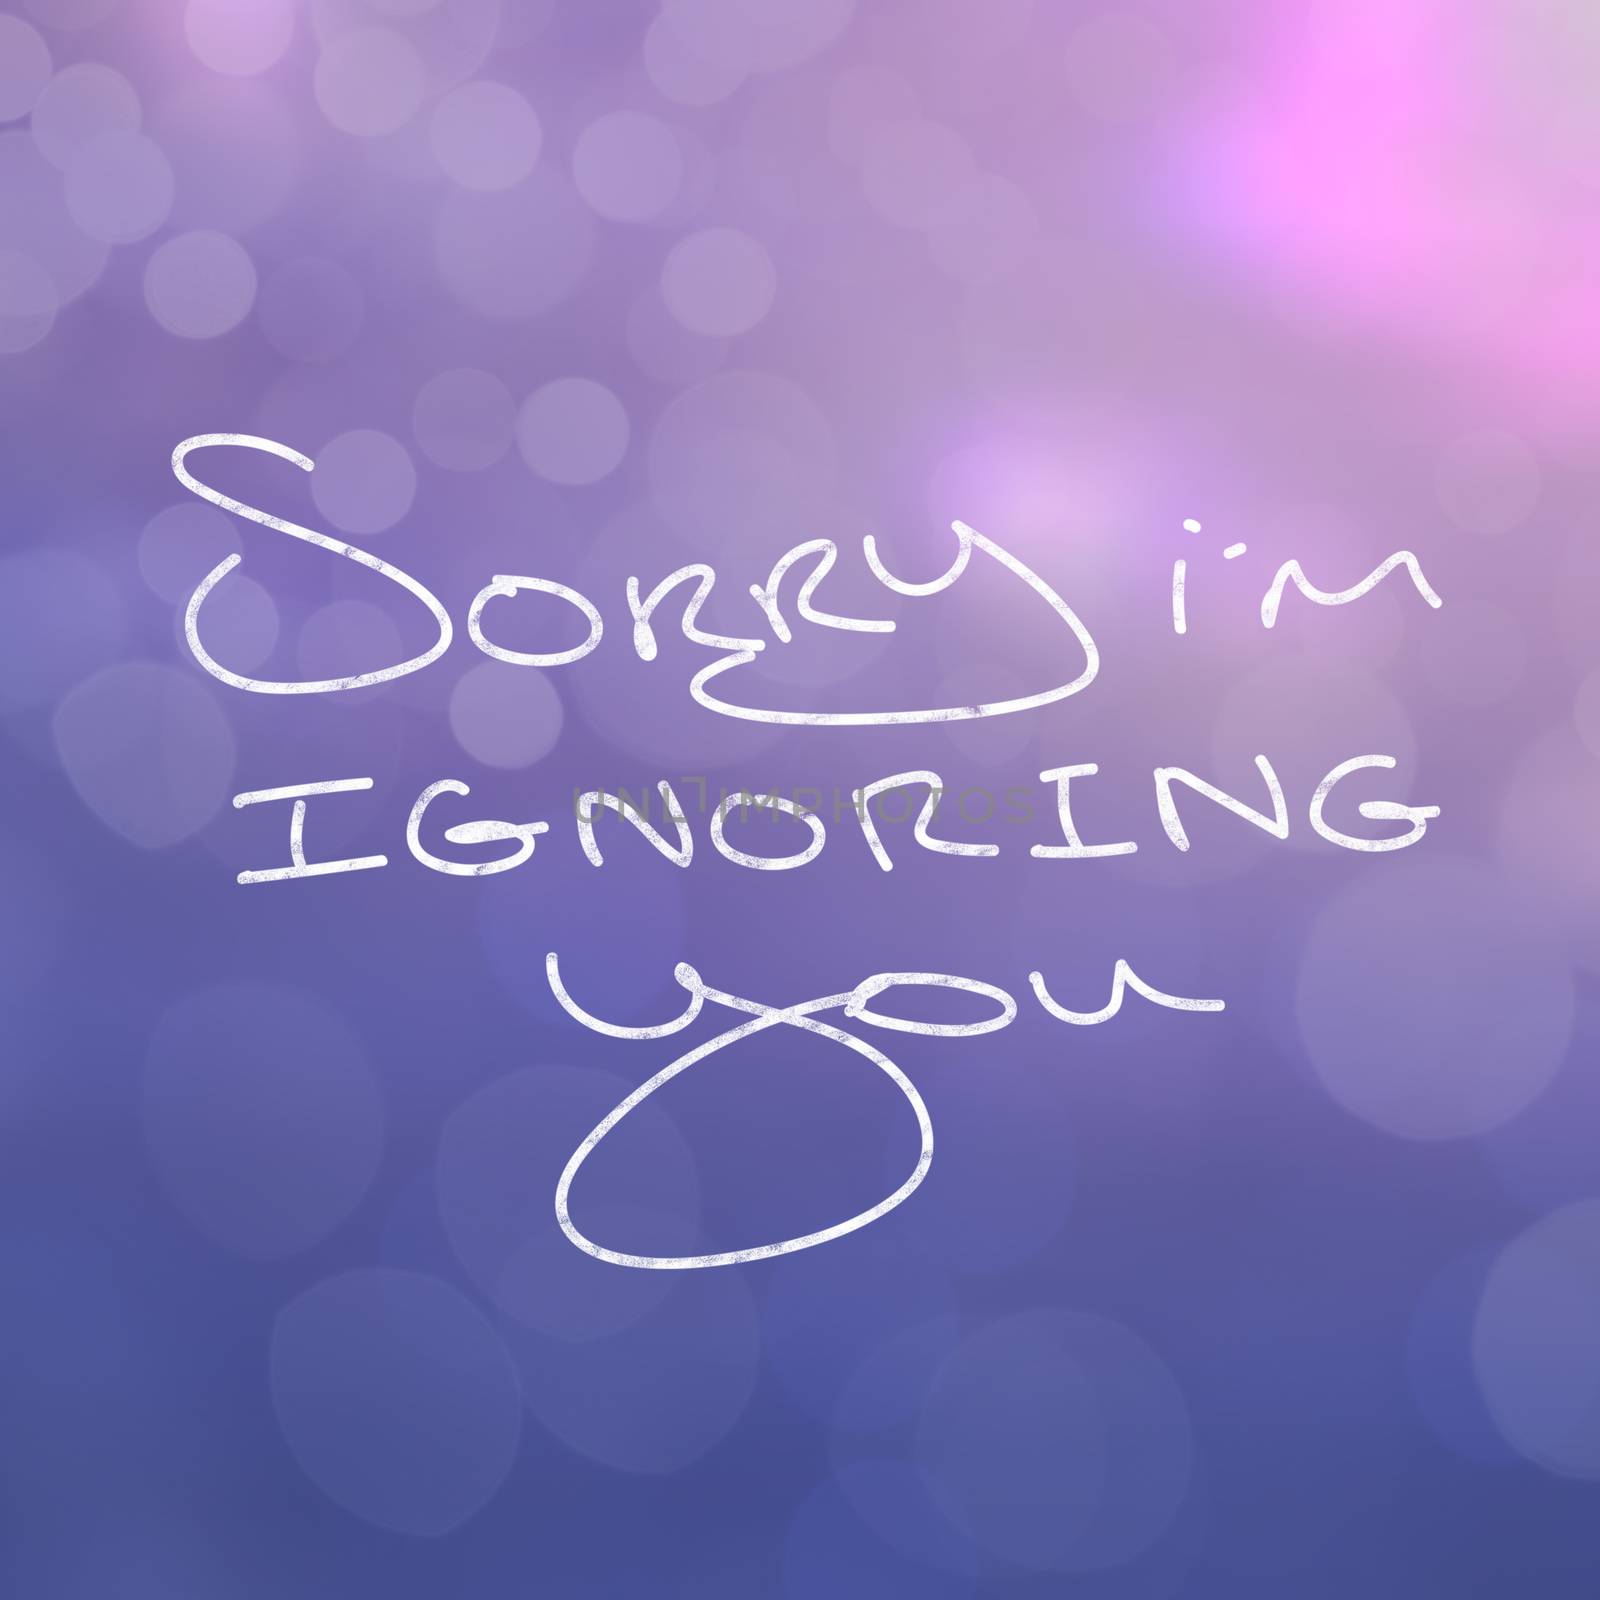 Close up of words saying sorry im ignoring you on purple background